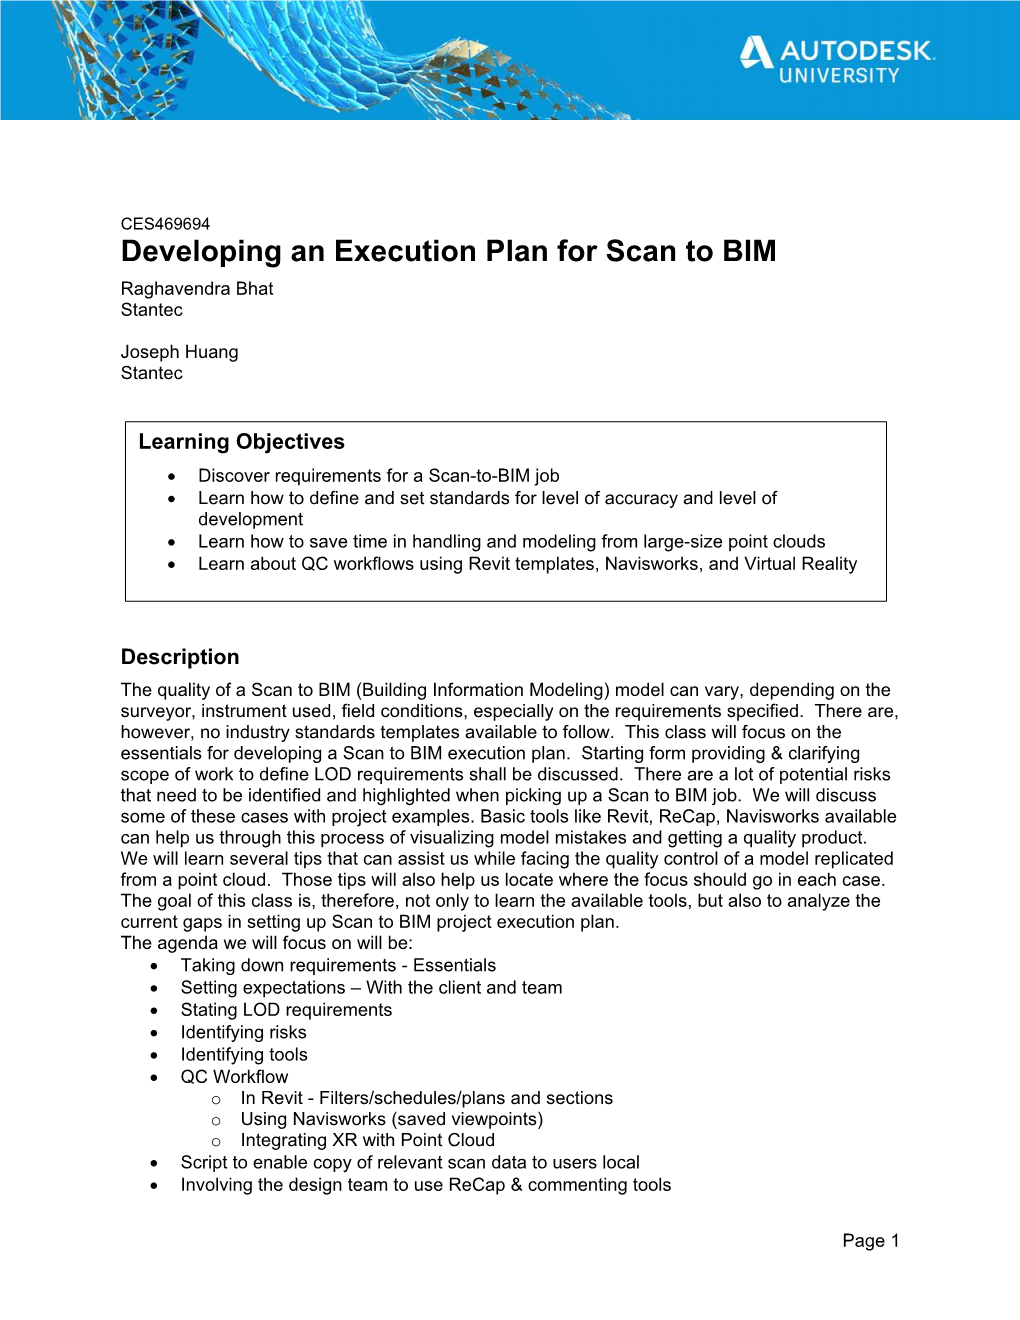 Developing an Execution Plan for Scan to BIM Raghavendra Bhat Stantec